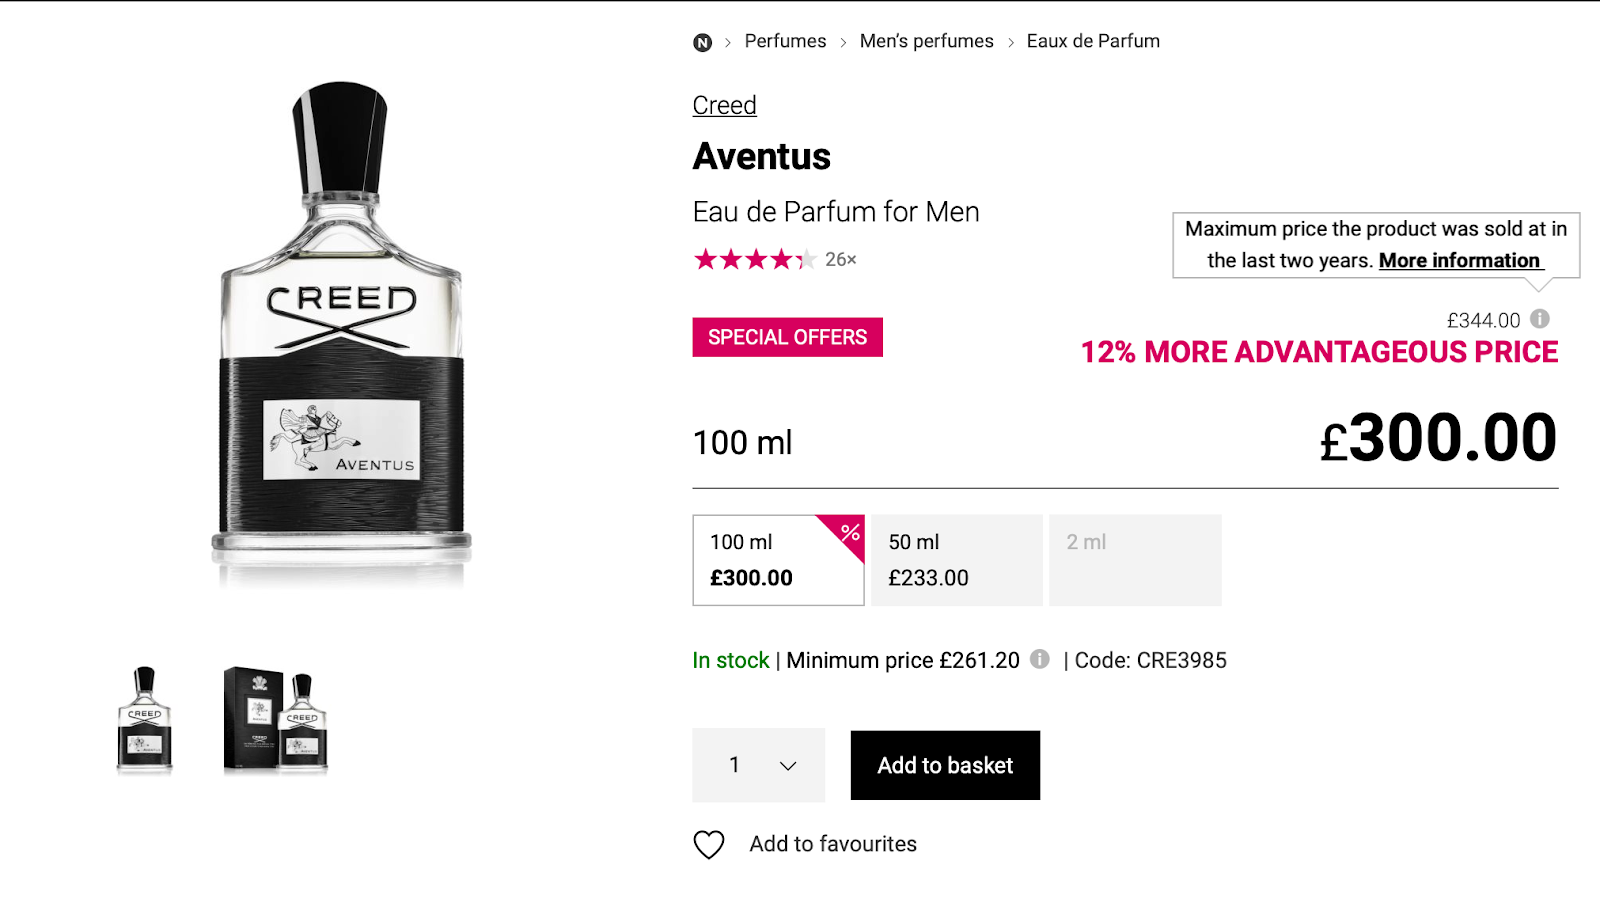 An example of a discount price counted from a retailer price, which is not compliant with the EU Directive. Notice how YOU SAVE X% visually mimics the 12% MORE ADVANTAGEOUS PRICE but the discount is counted differently.